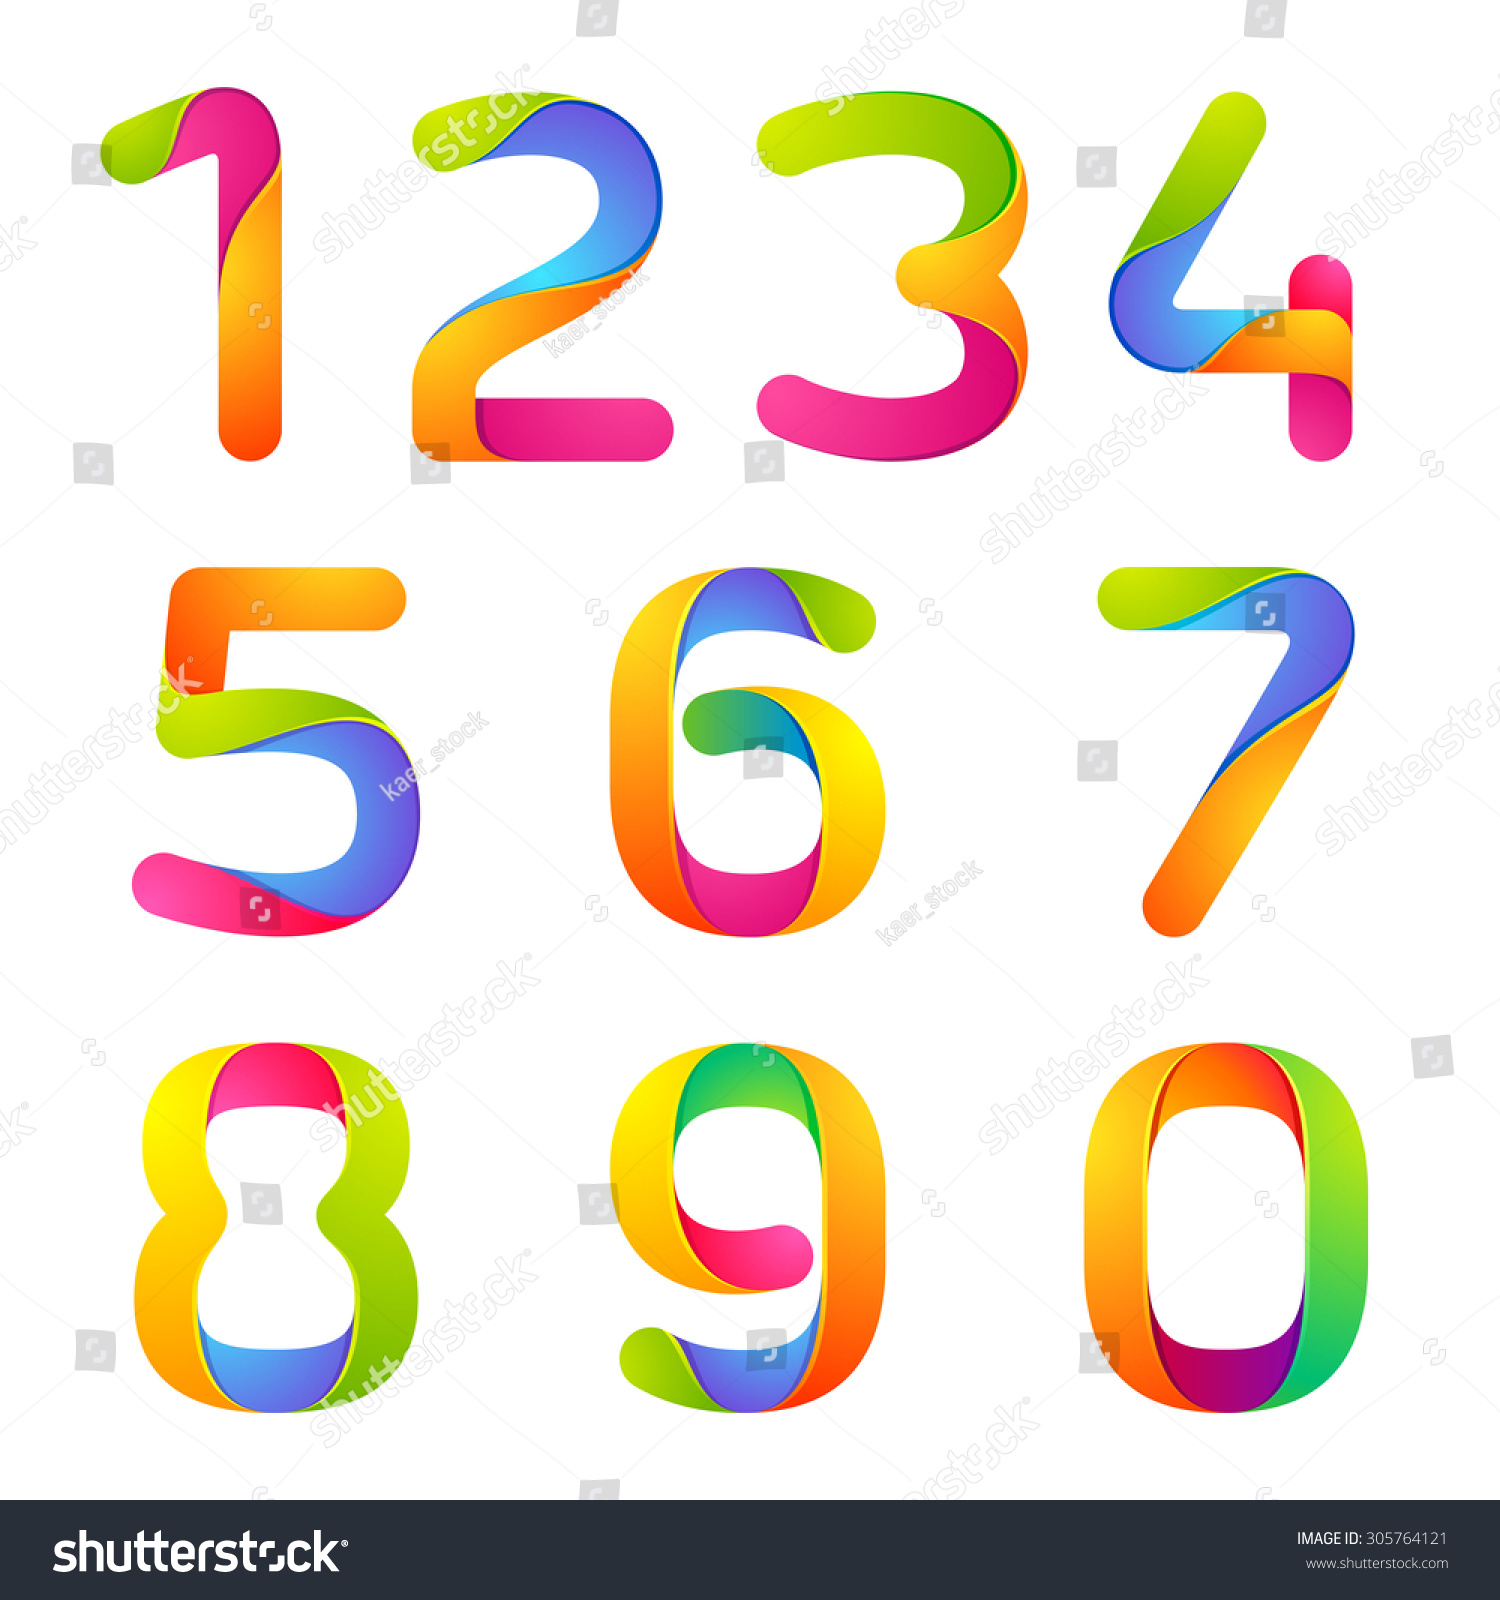 Colorful Numbers Set. Vector Design Template Elements For Your ...